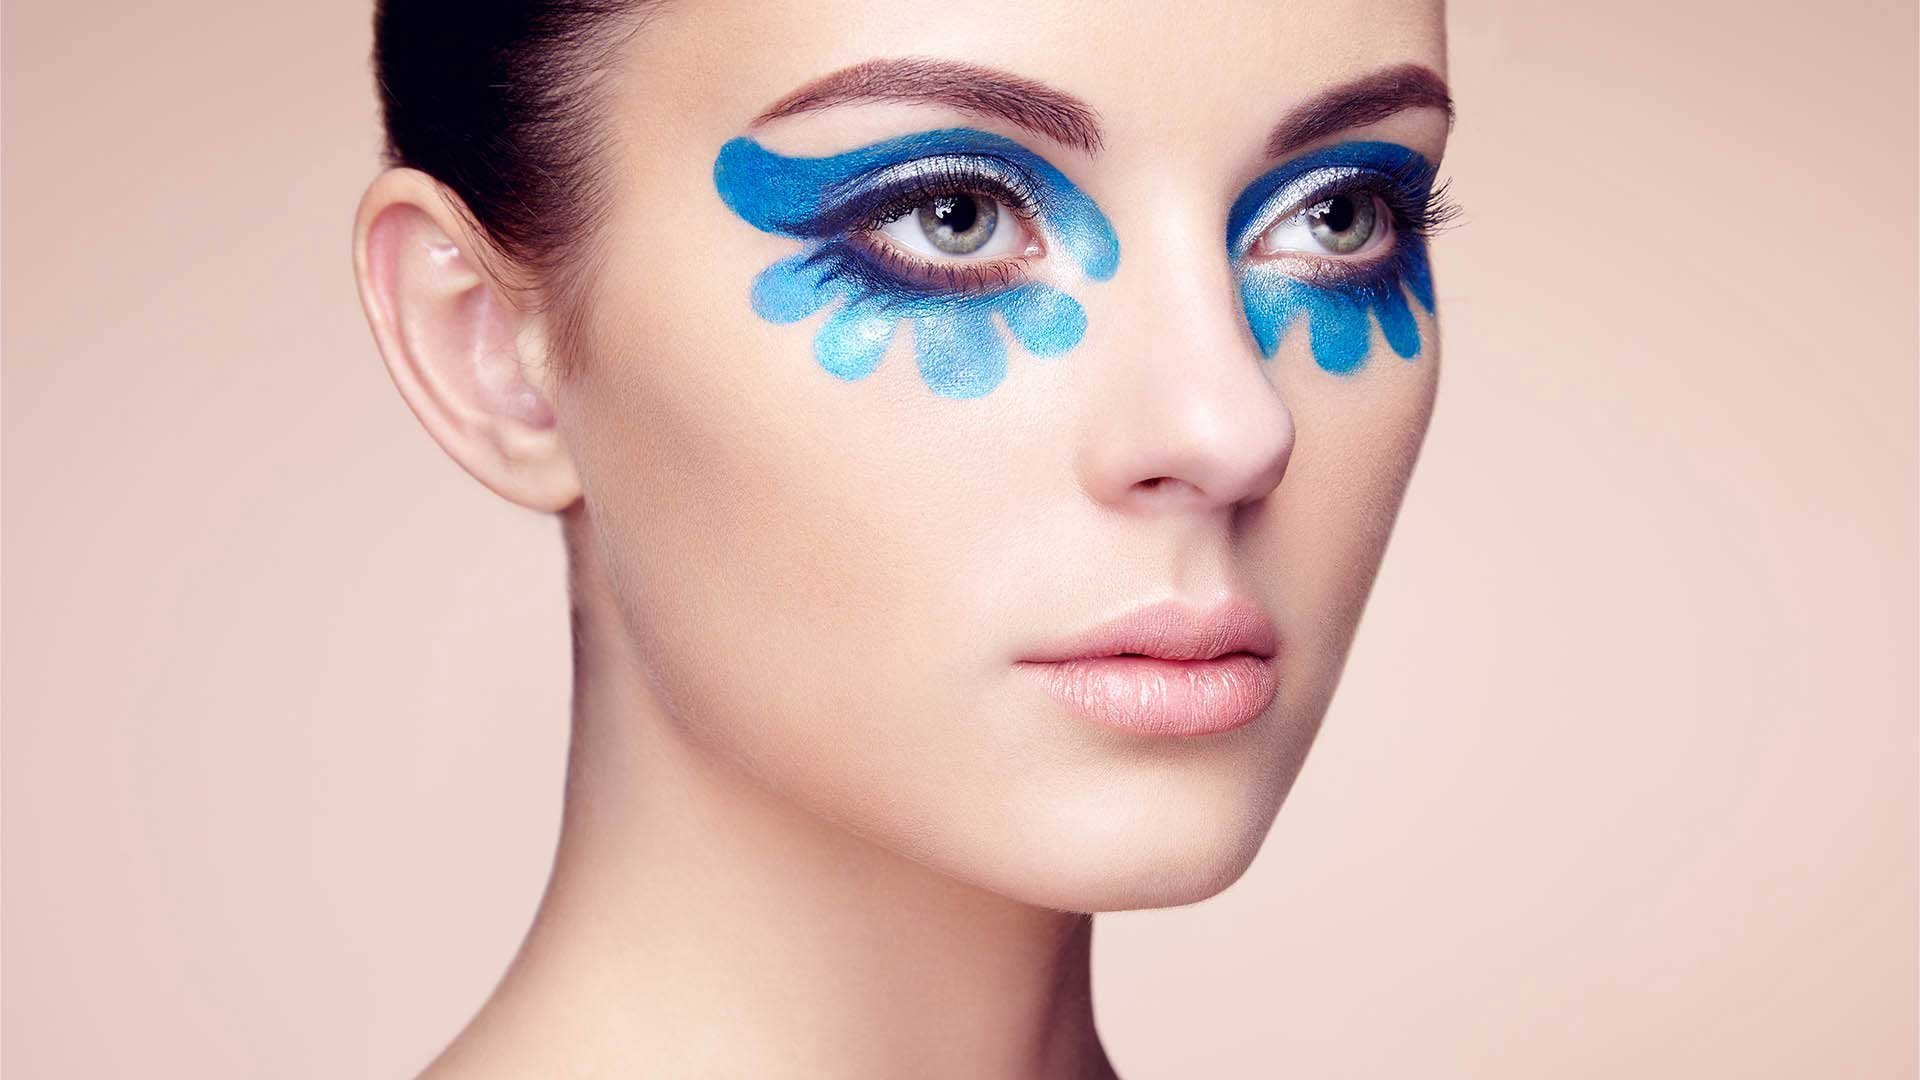 Loreal Paris Article 5 Cool Makeup Looks And Ideas Everyone Will Envy D